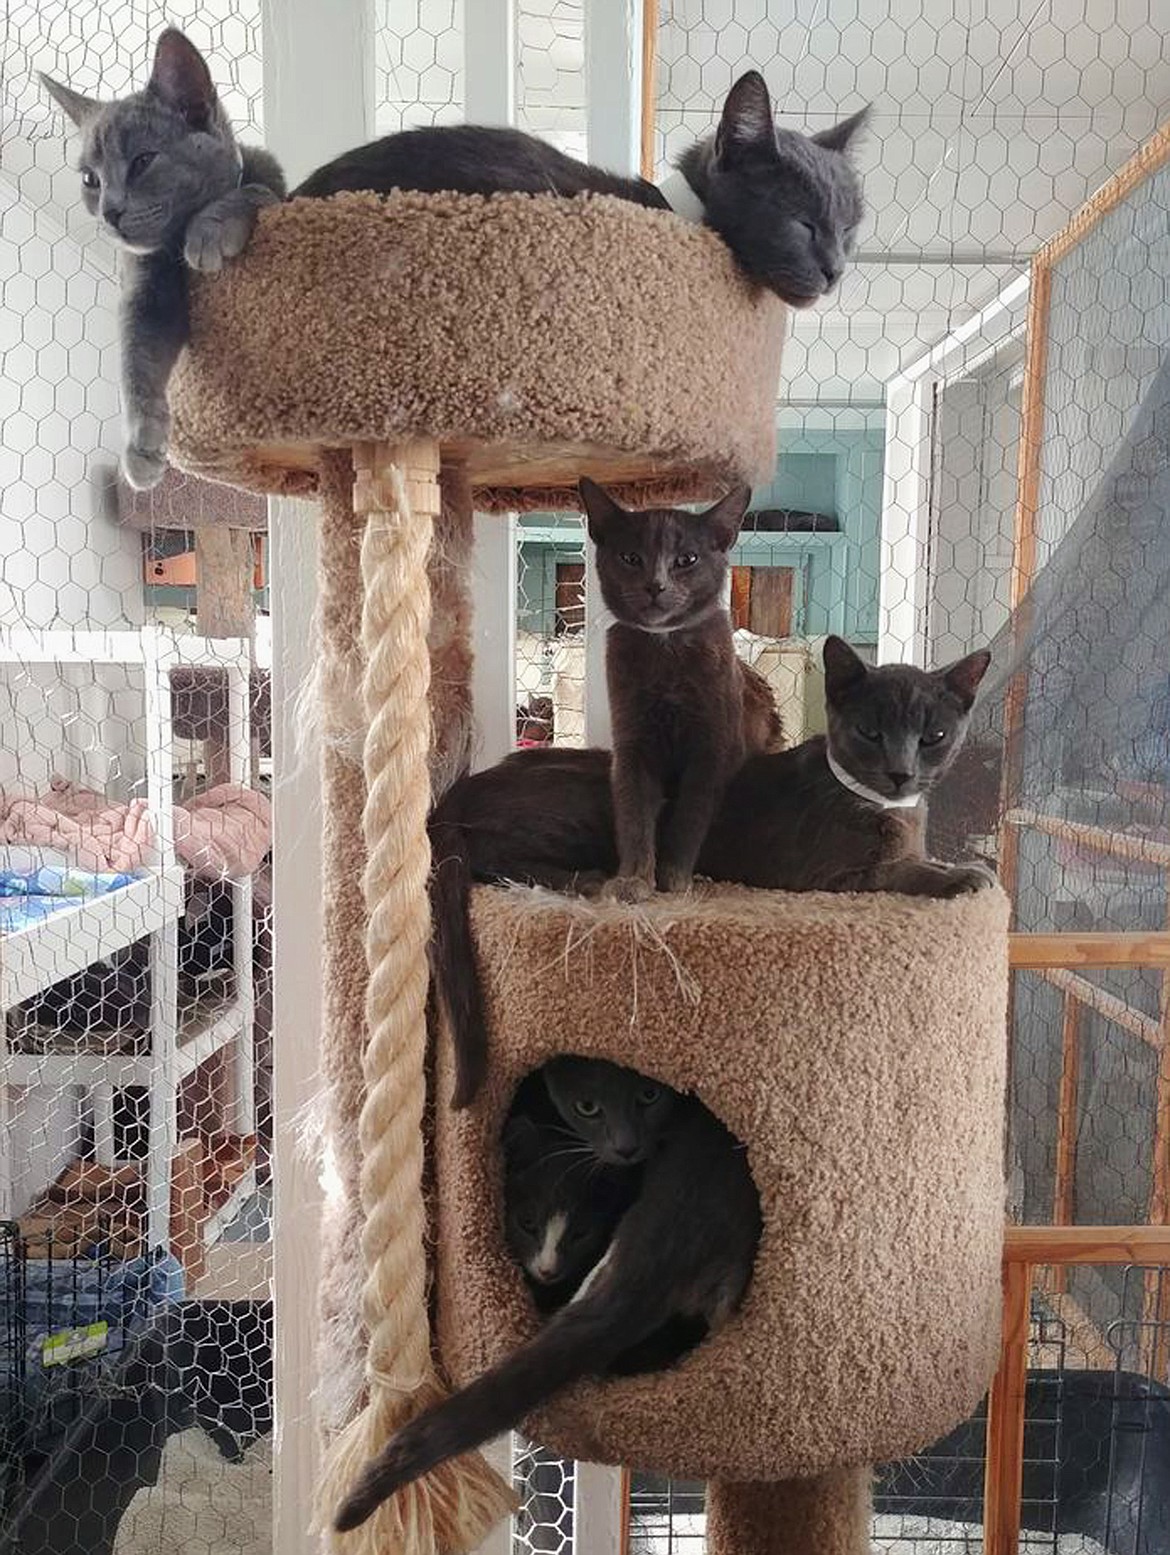 Cats enjoy safety at the Flathead Spay and Neuter Task Force after being removed from a hoarding situation a month ago. (Beadles photo)